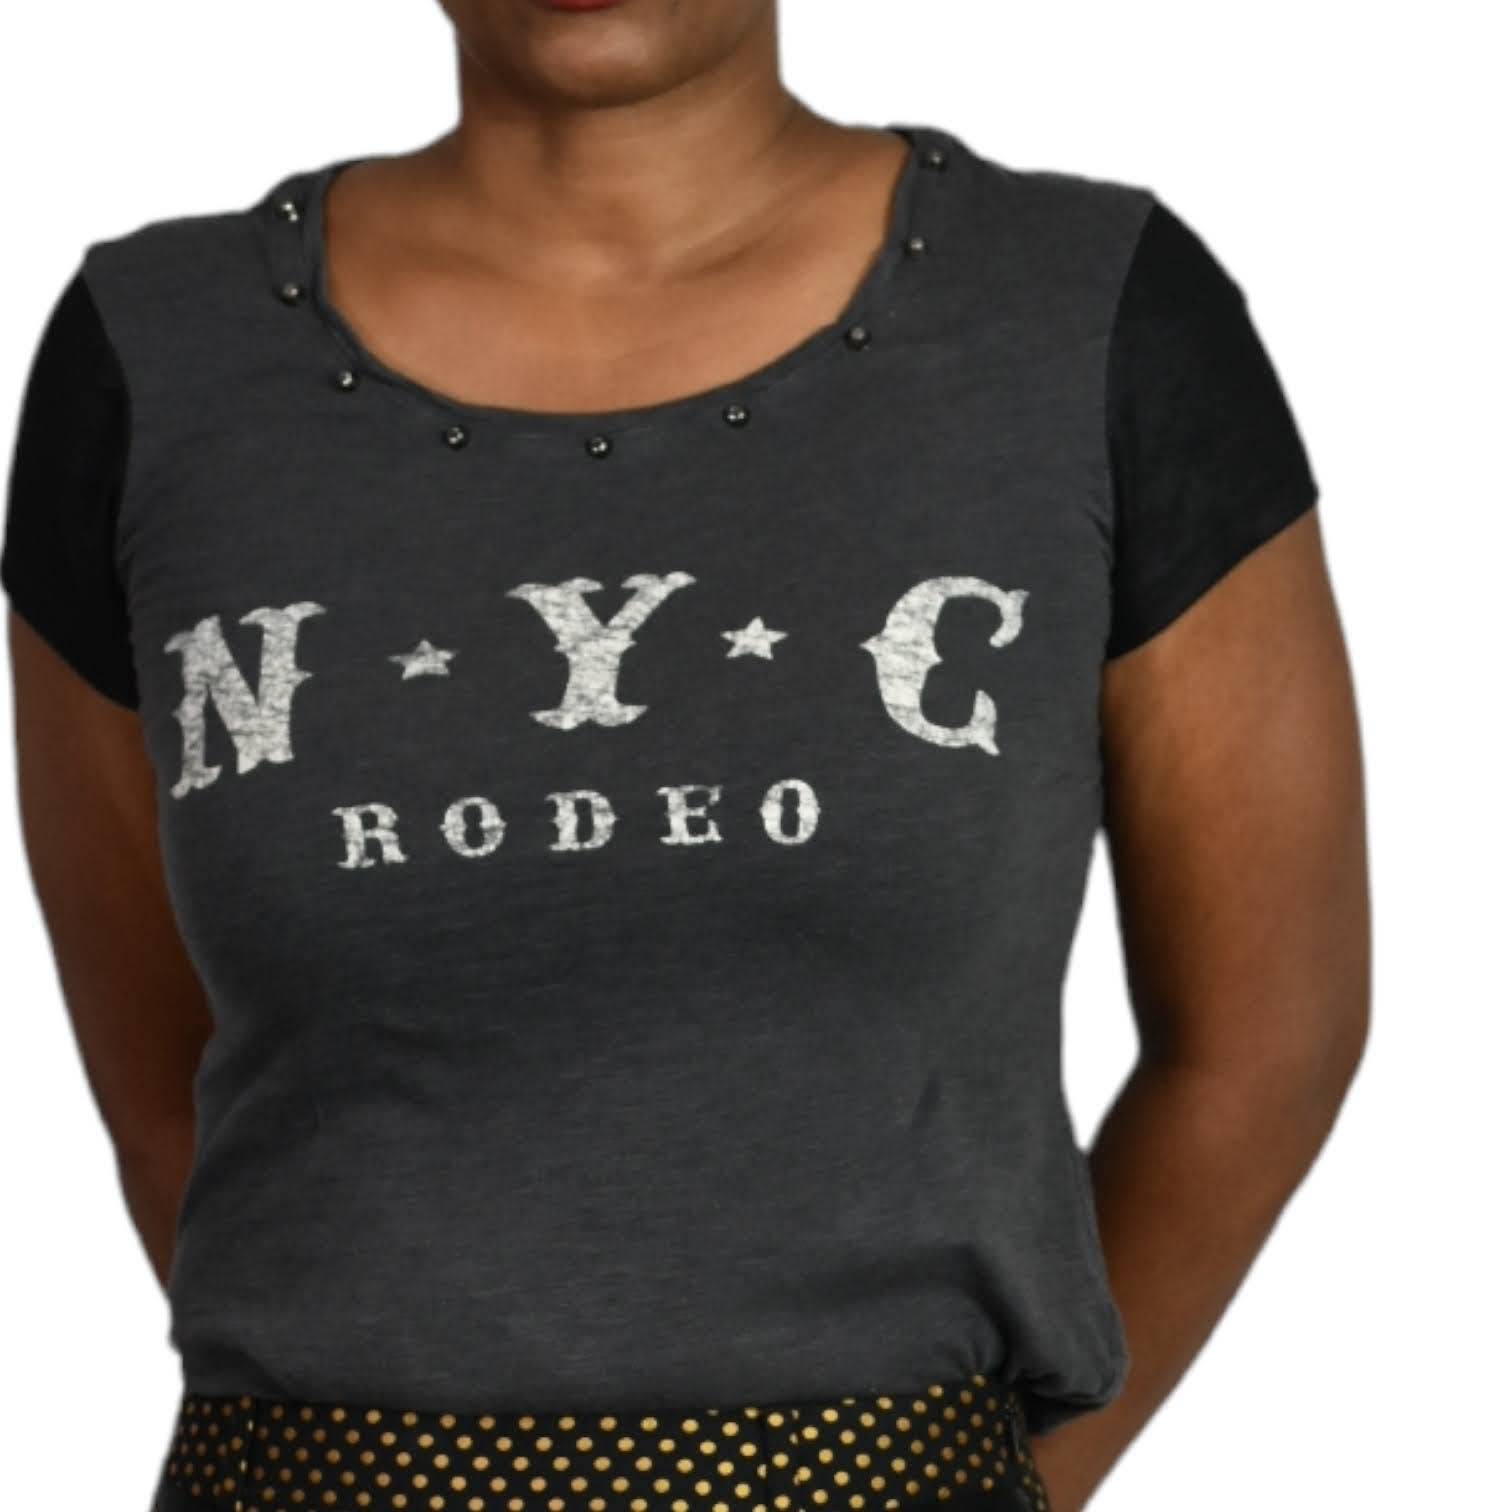 Express NYC Rodeo Tee Gray Black Size Short Sleeve Western Studded Size Small